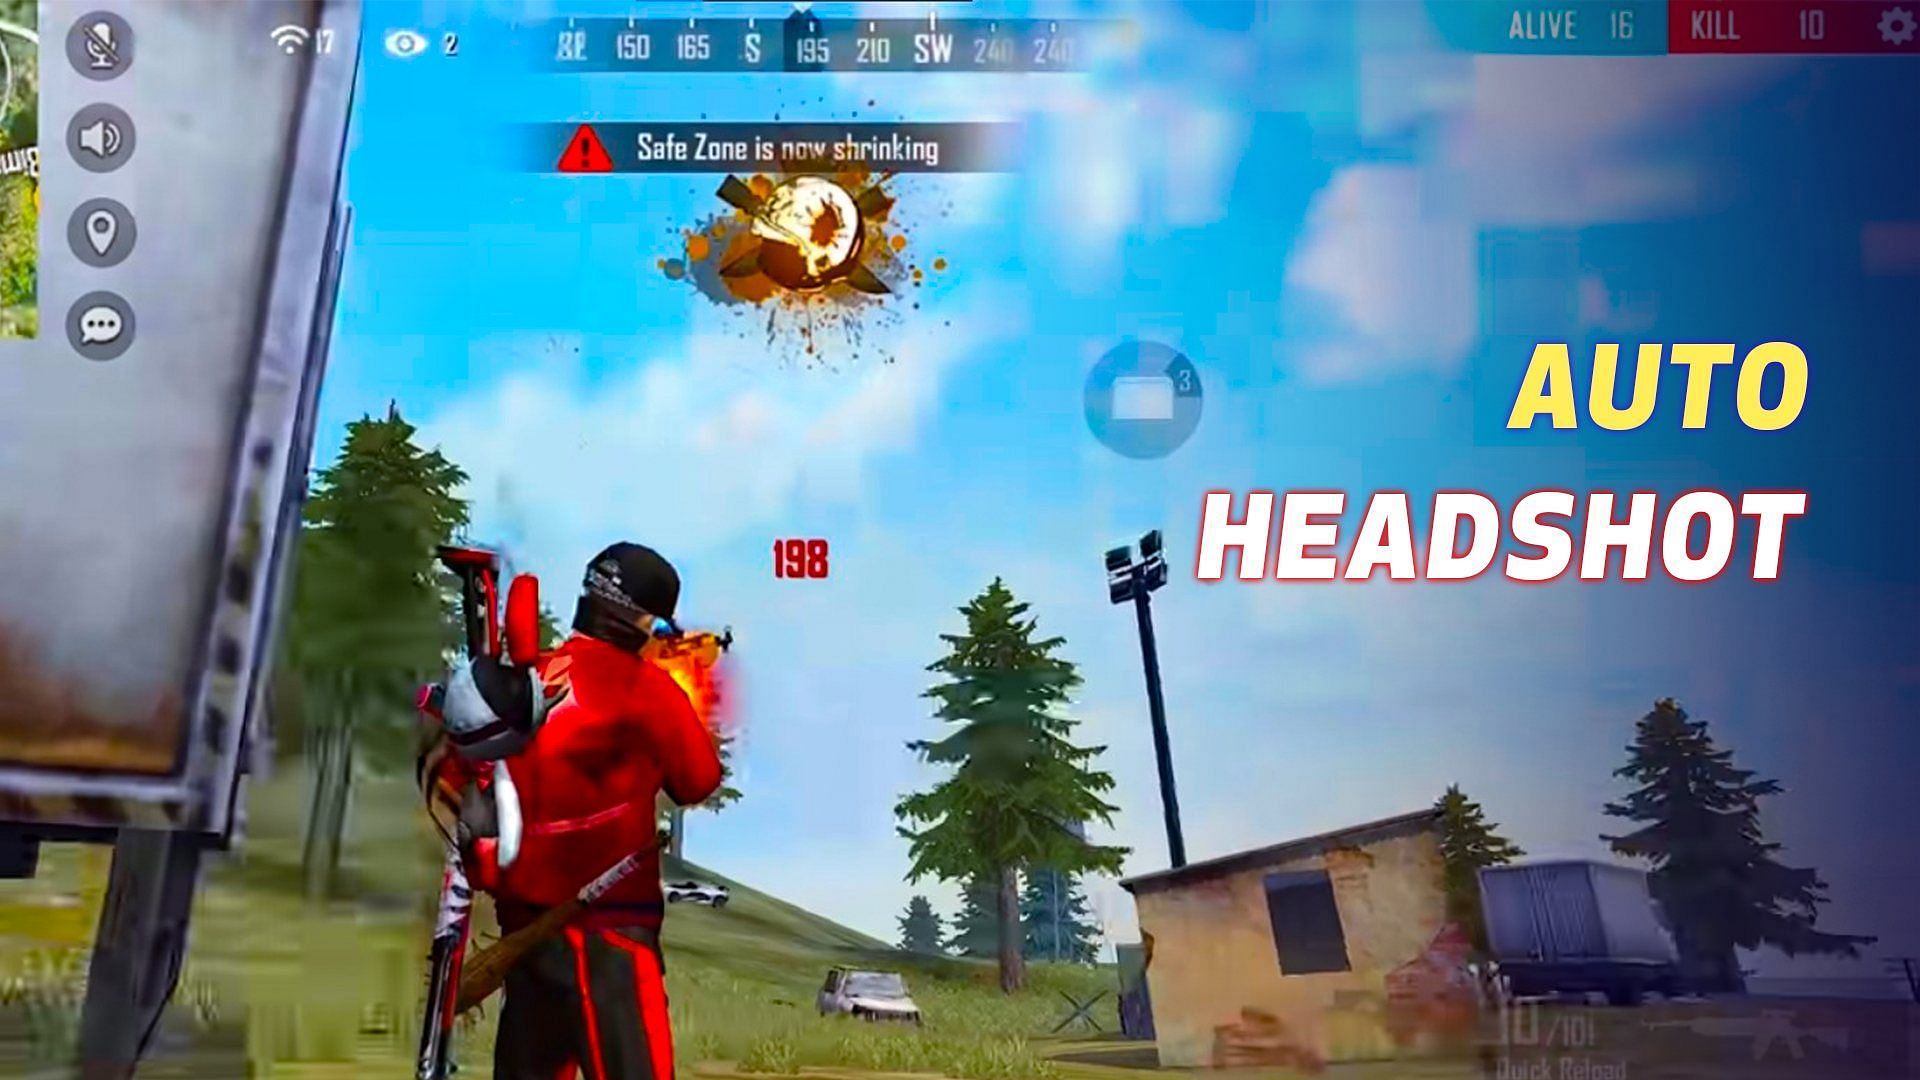 How to do auto headshot in Free Fire - Quora